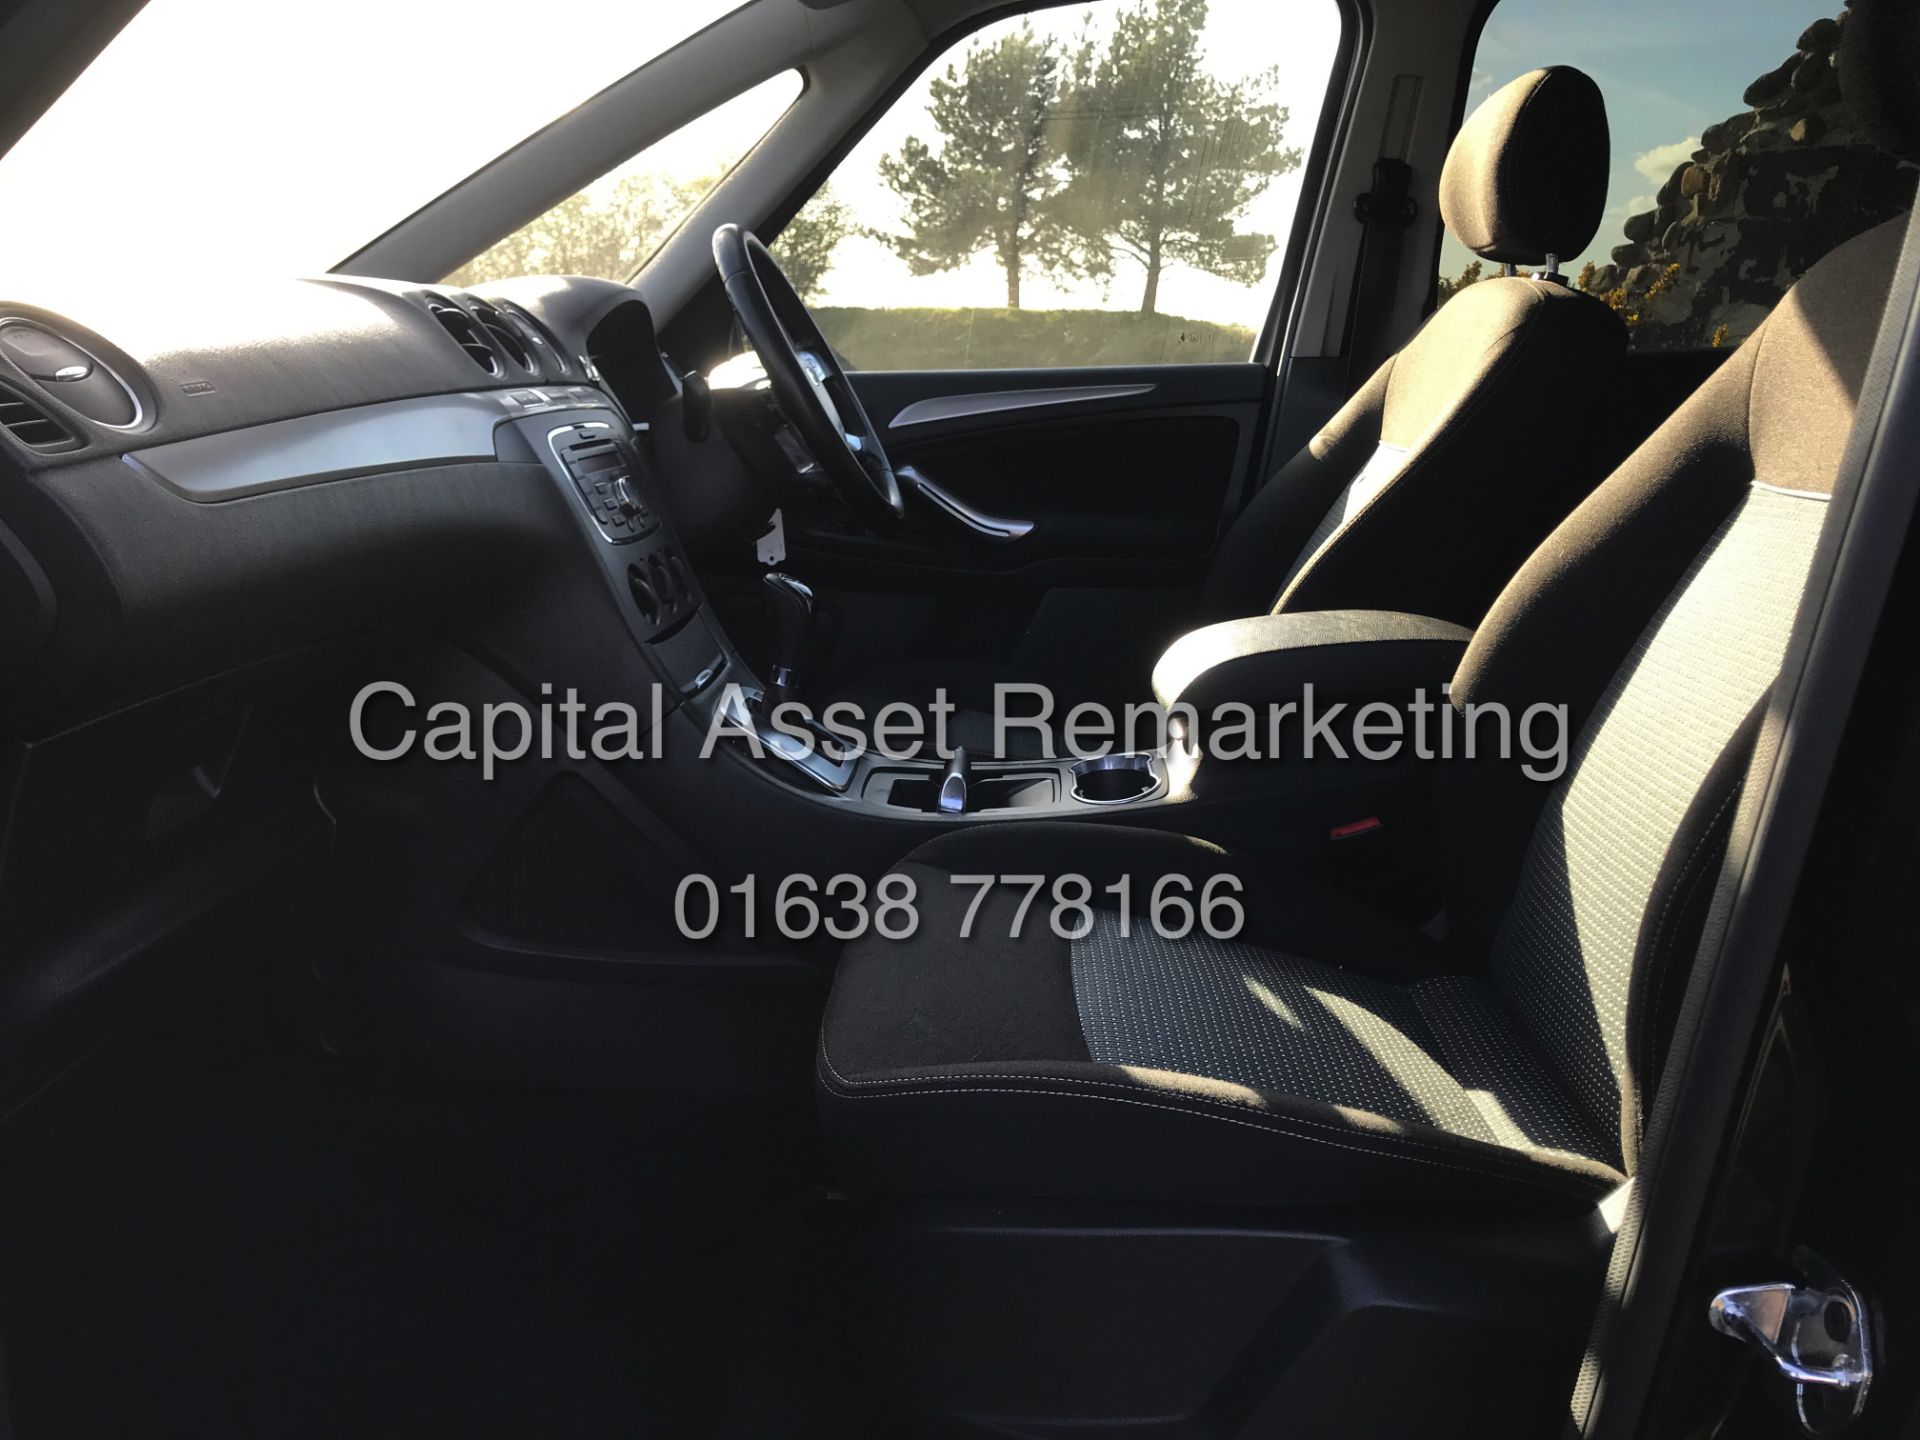 On Sale FORD GALAXY 2.0TDCI "POWER-SHIFT" 7 SEATER (15 REG) 1 OWNER - 140BHP - AIR CON - ELEC PACK - Image 10 of 20